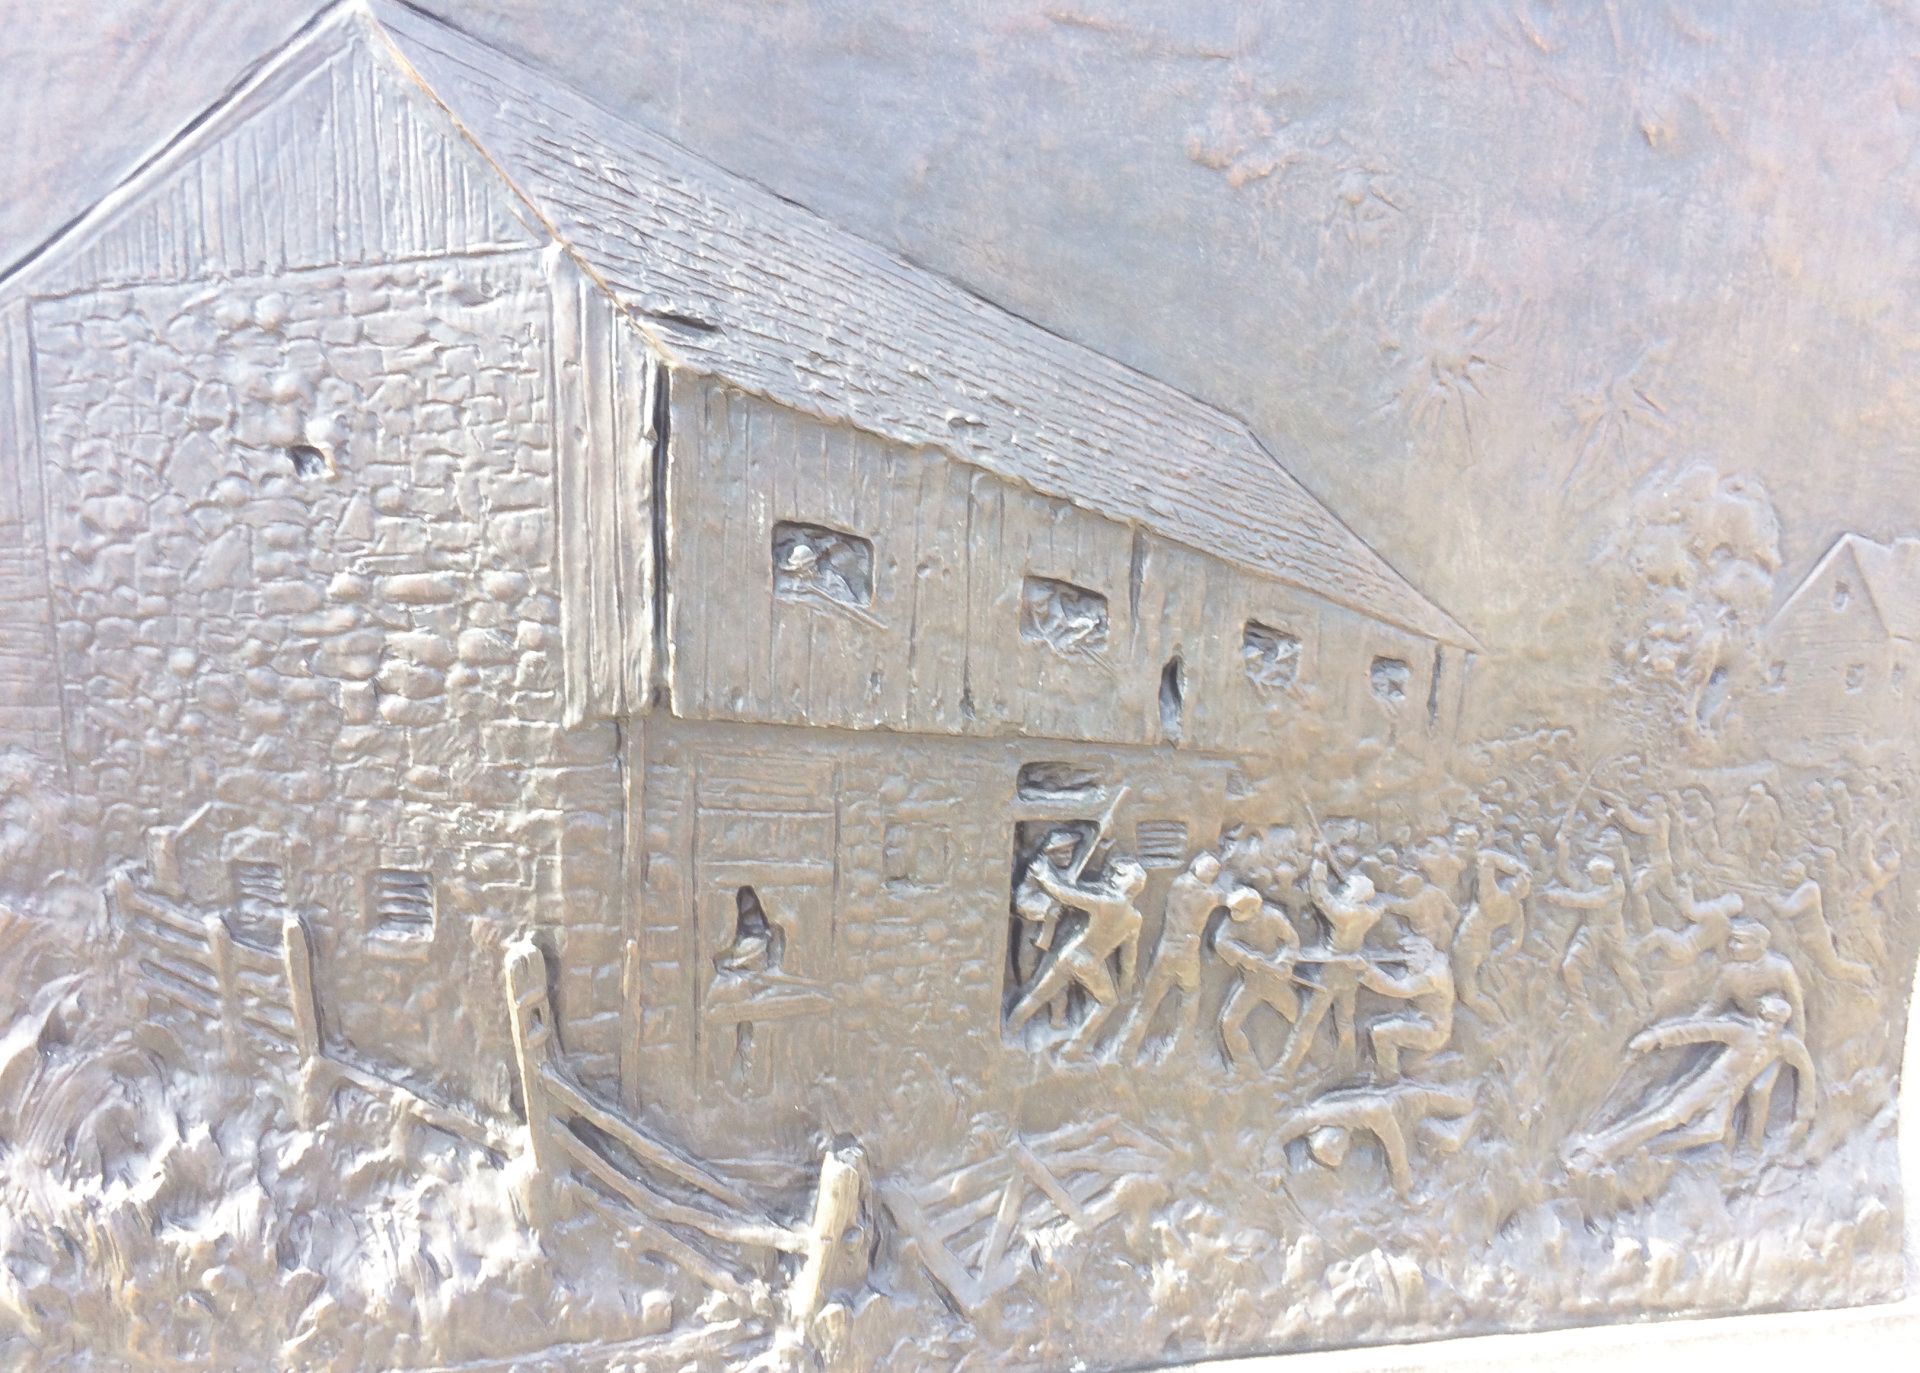 A sculptor's rendition of the Bliss Farm, Gettysburg  (Author Photo)